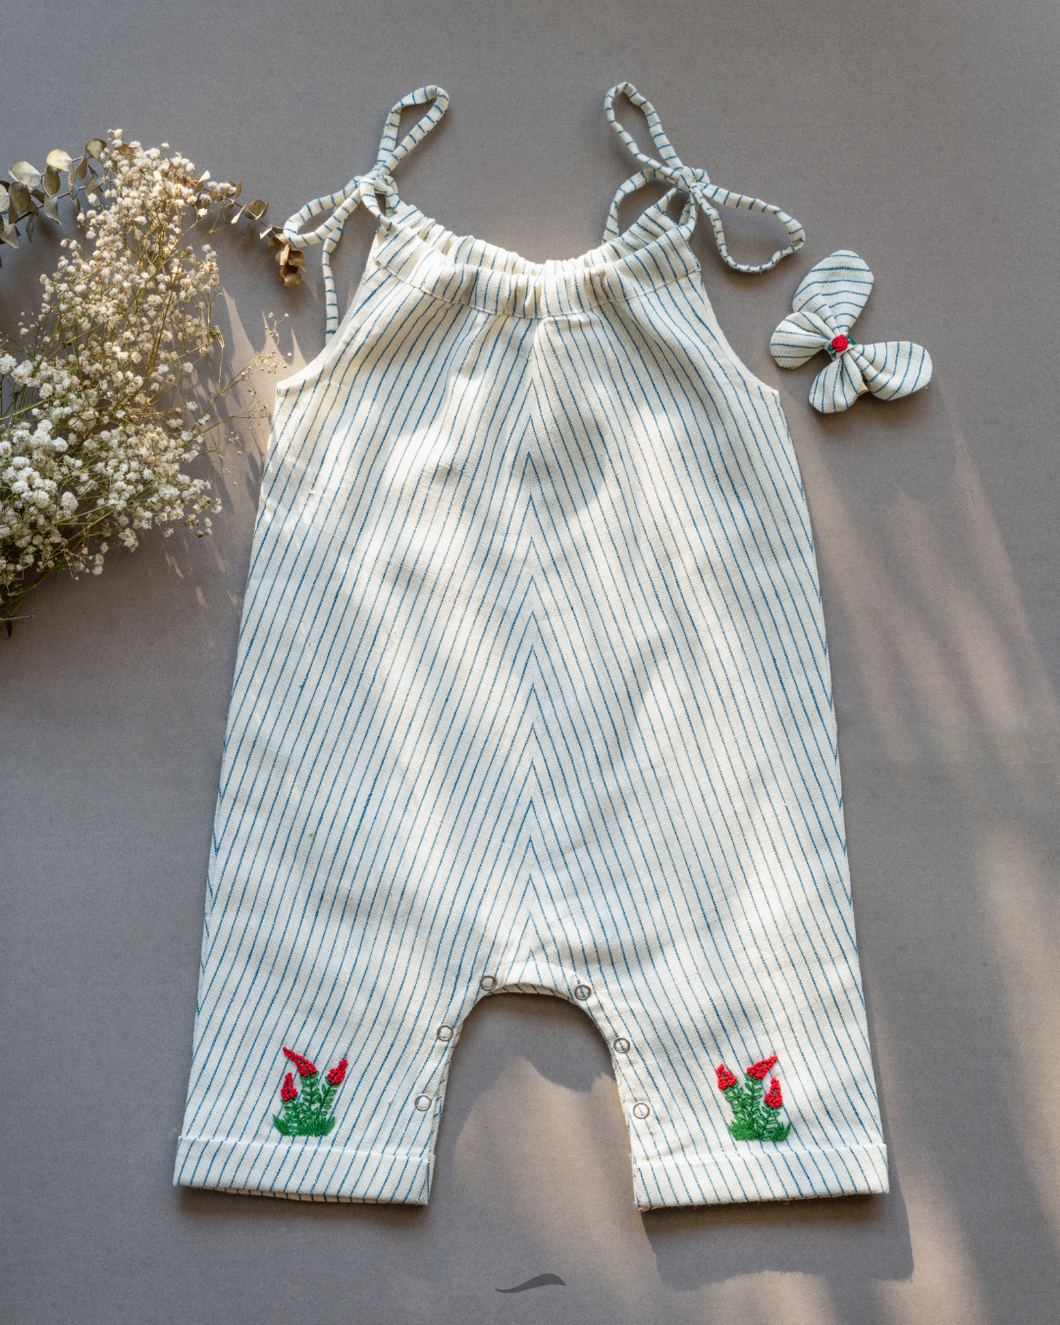 A cute baby girl dress along with matching hair accessory and some flower aside.